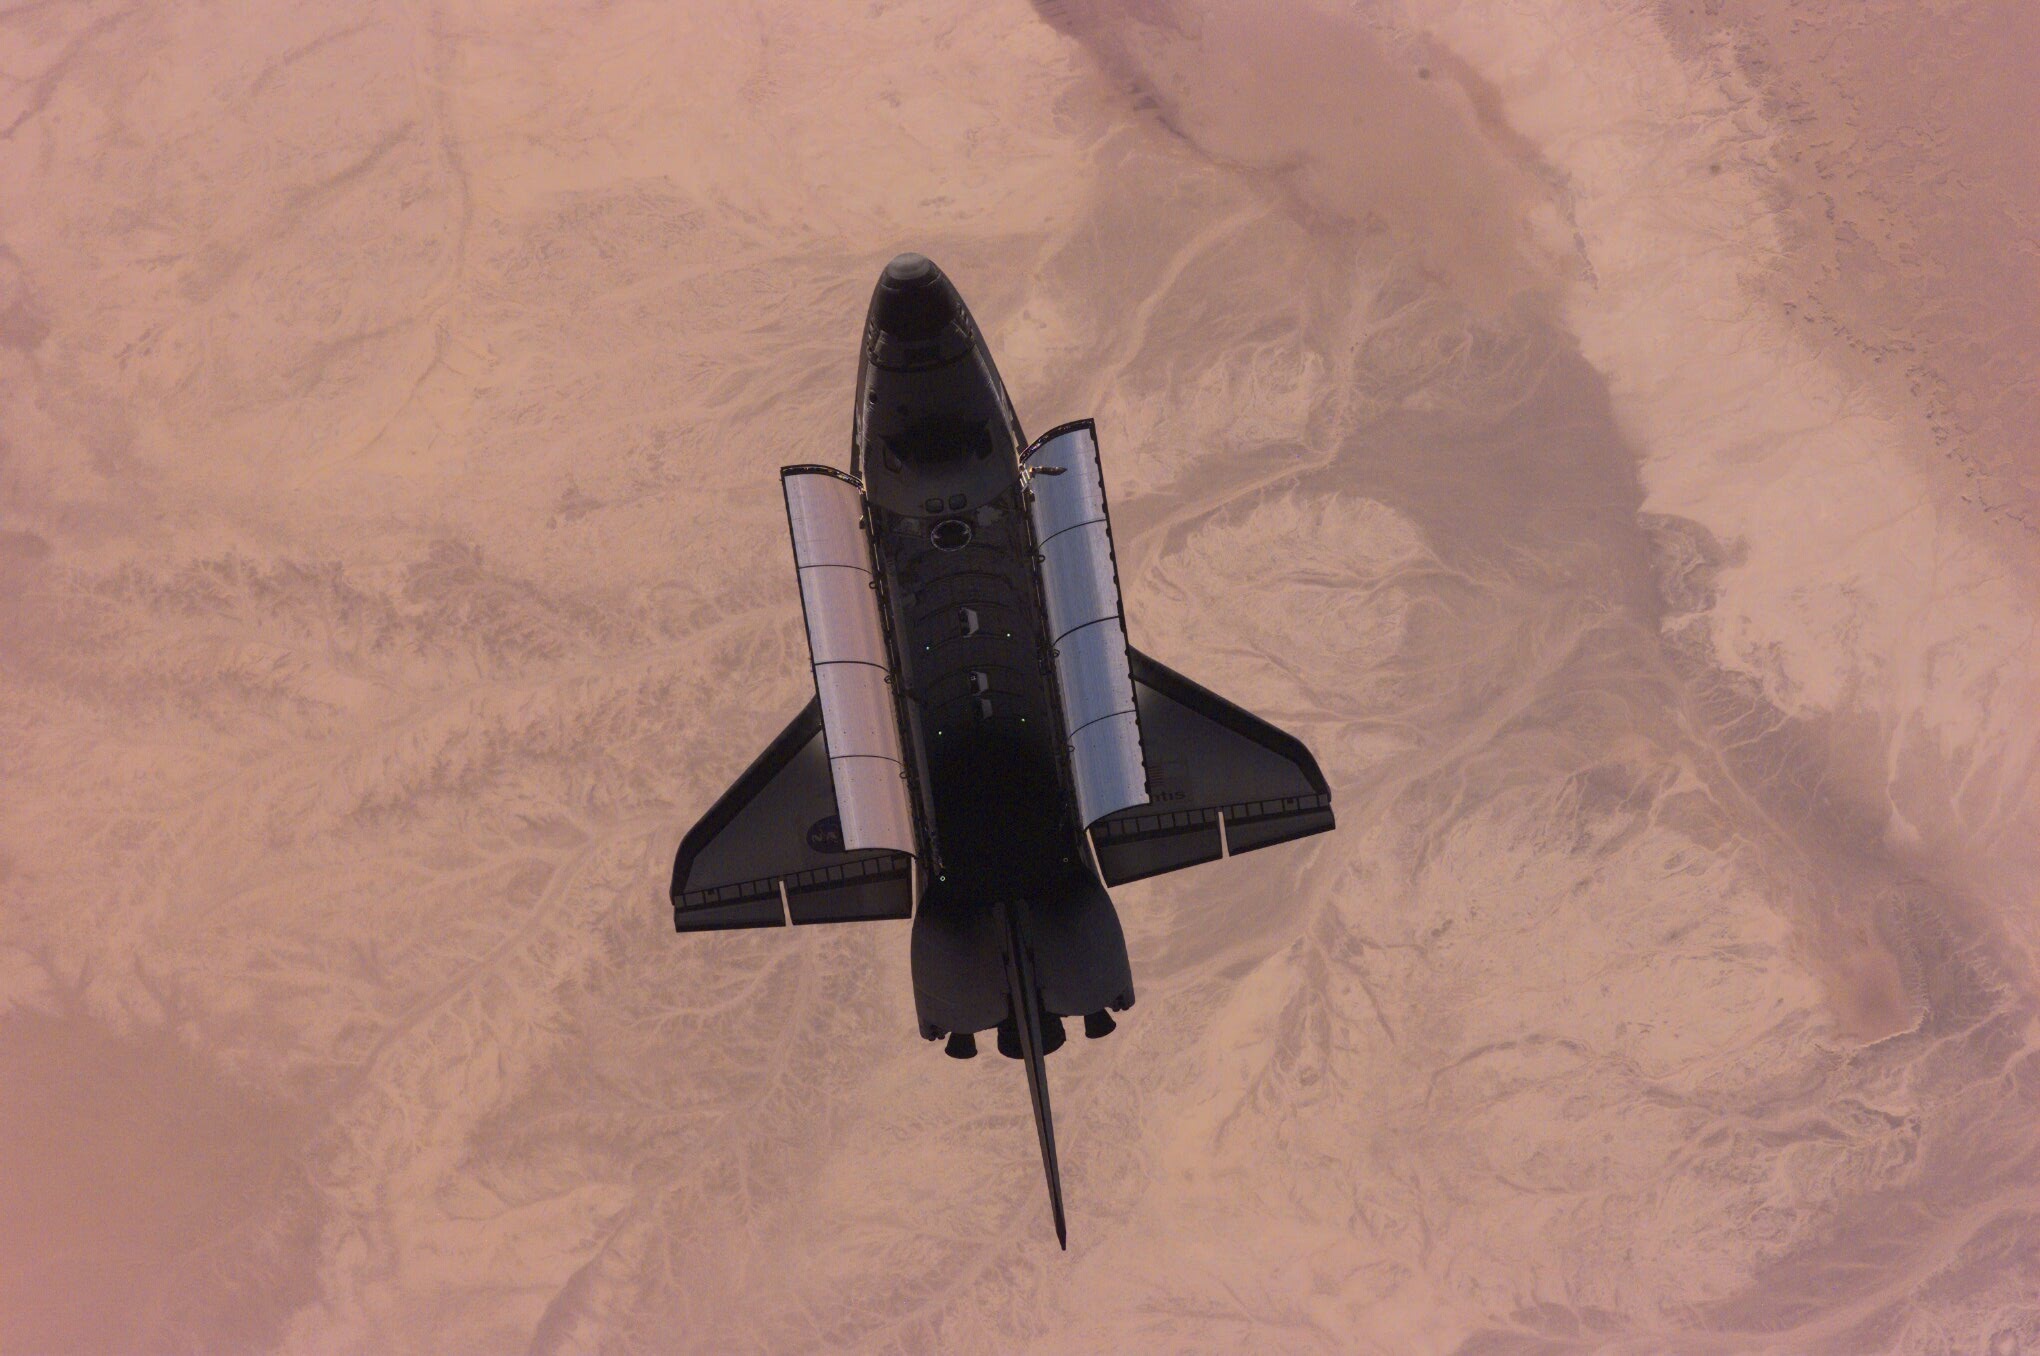 vehicles, space shuttle, space shuttles download HD wallpaper